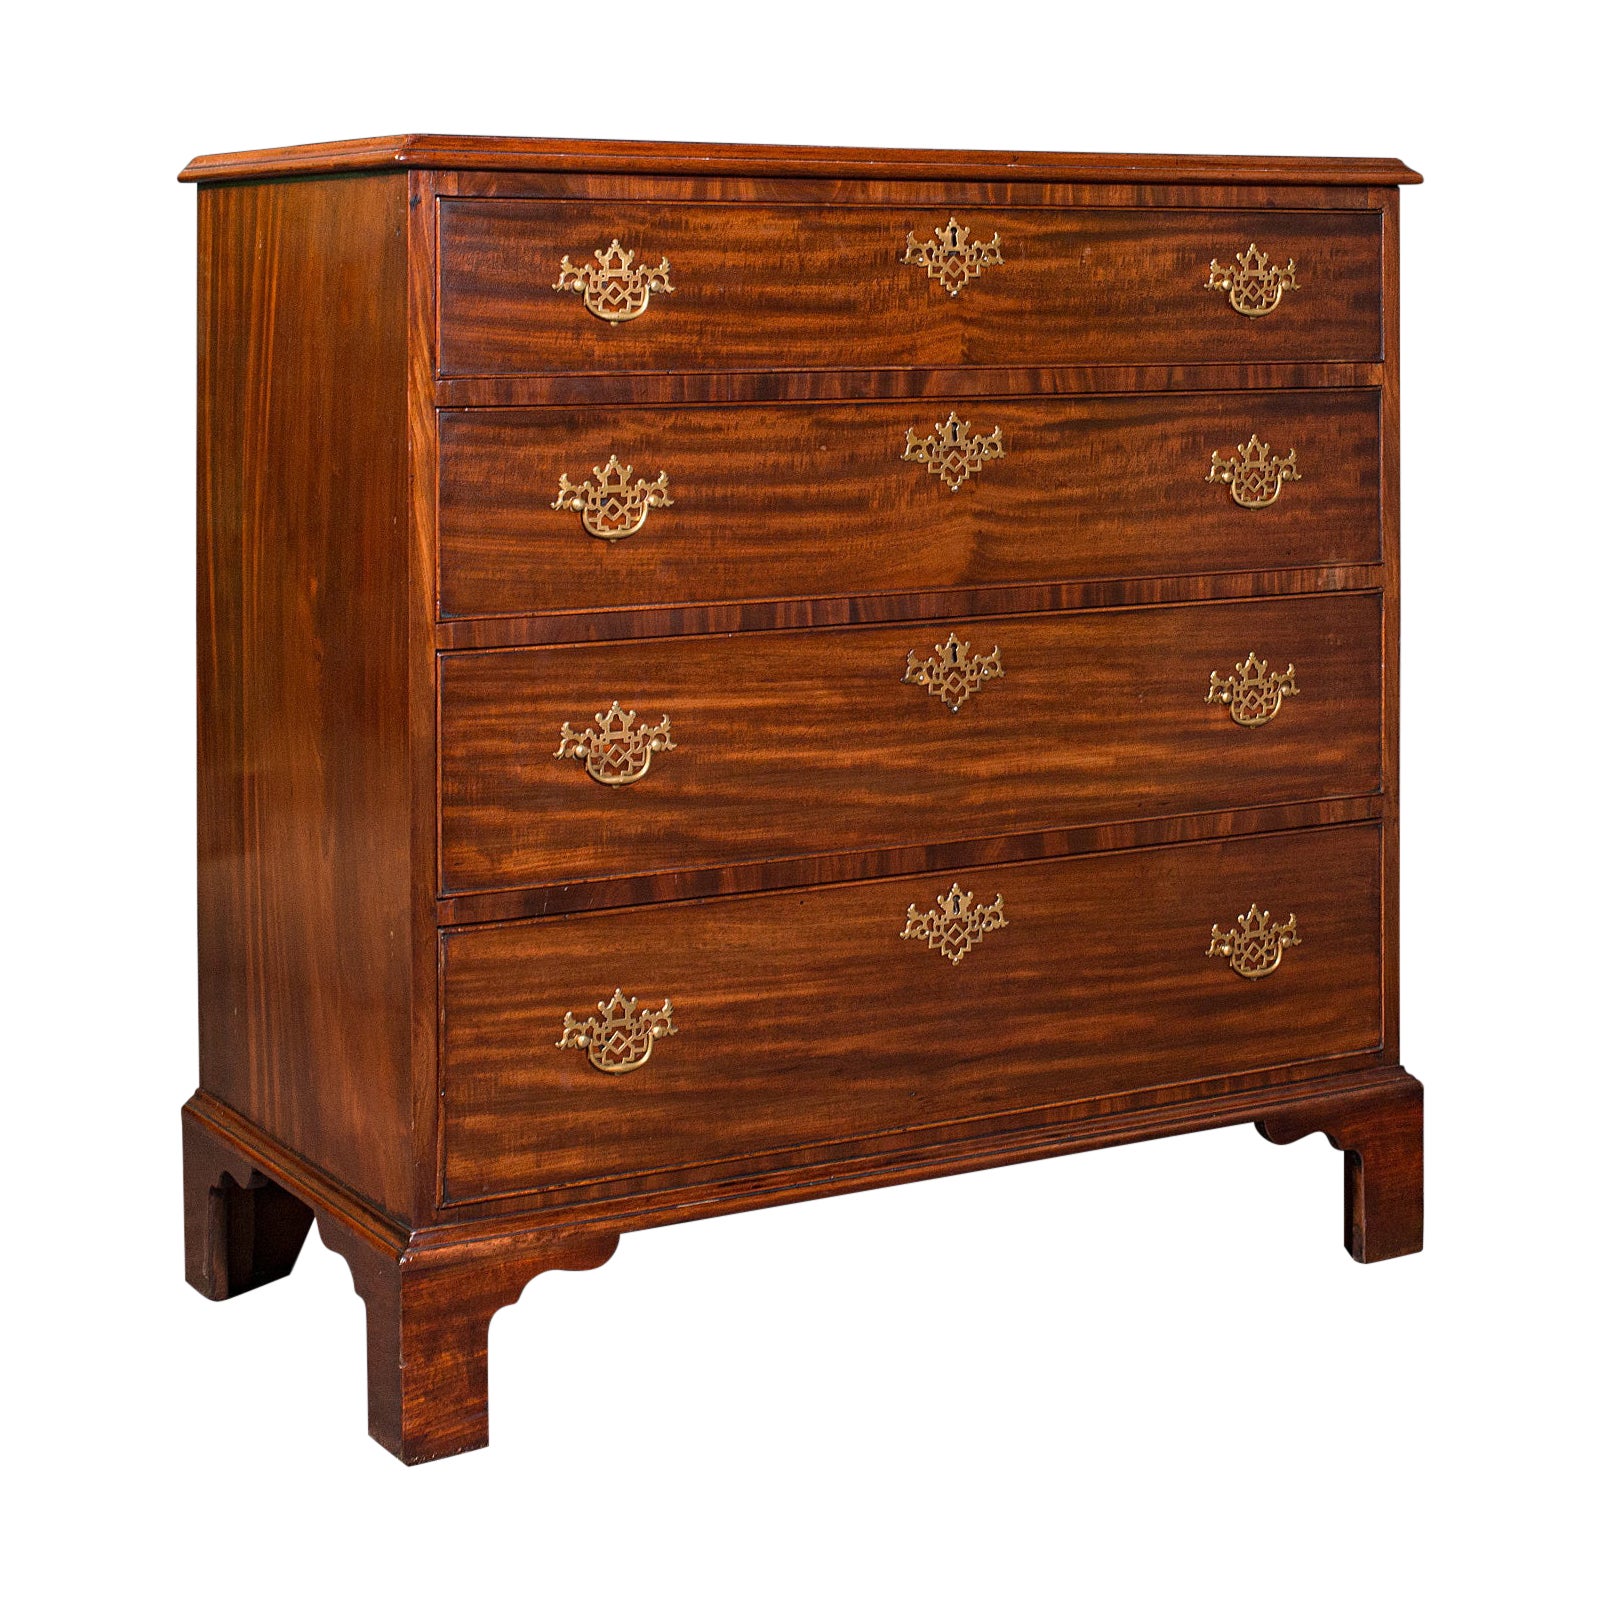 Antique Gentleman's Chest of Drawers, English, Mahogany, Bedroom, Georgian, 1800 For Sale